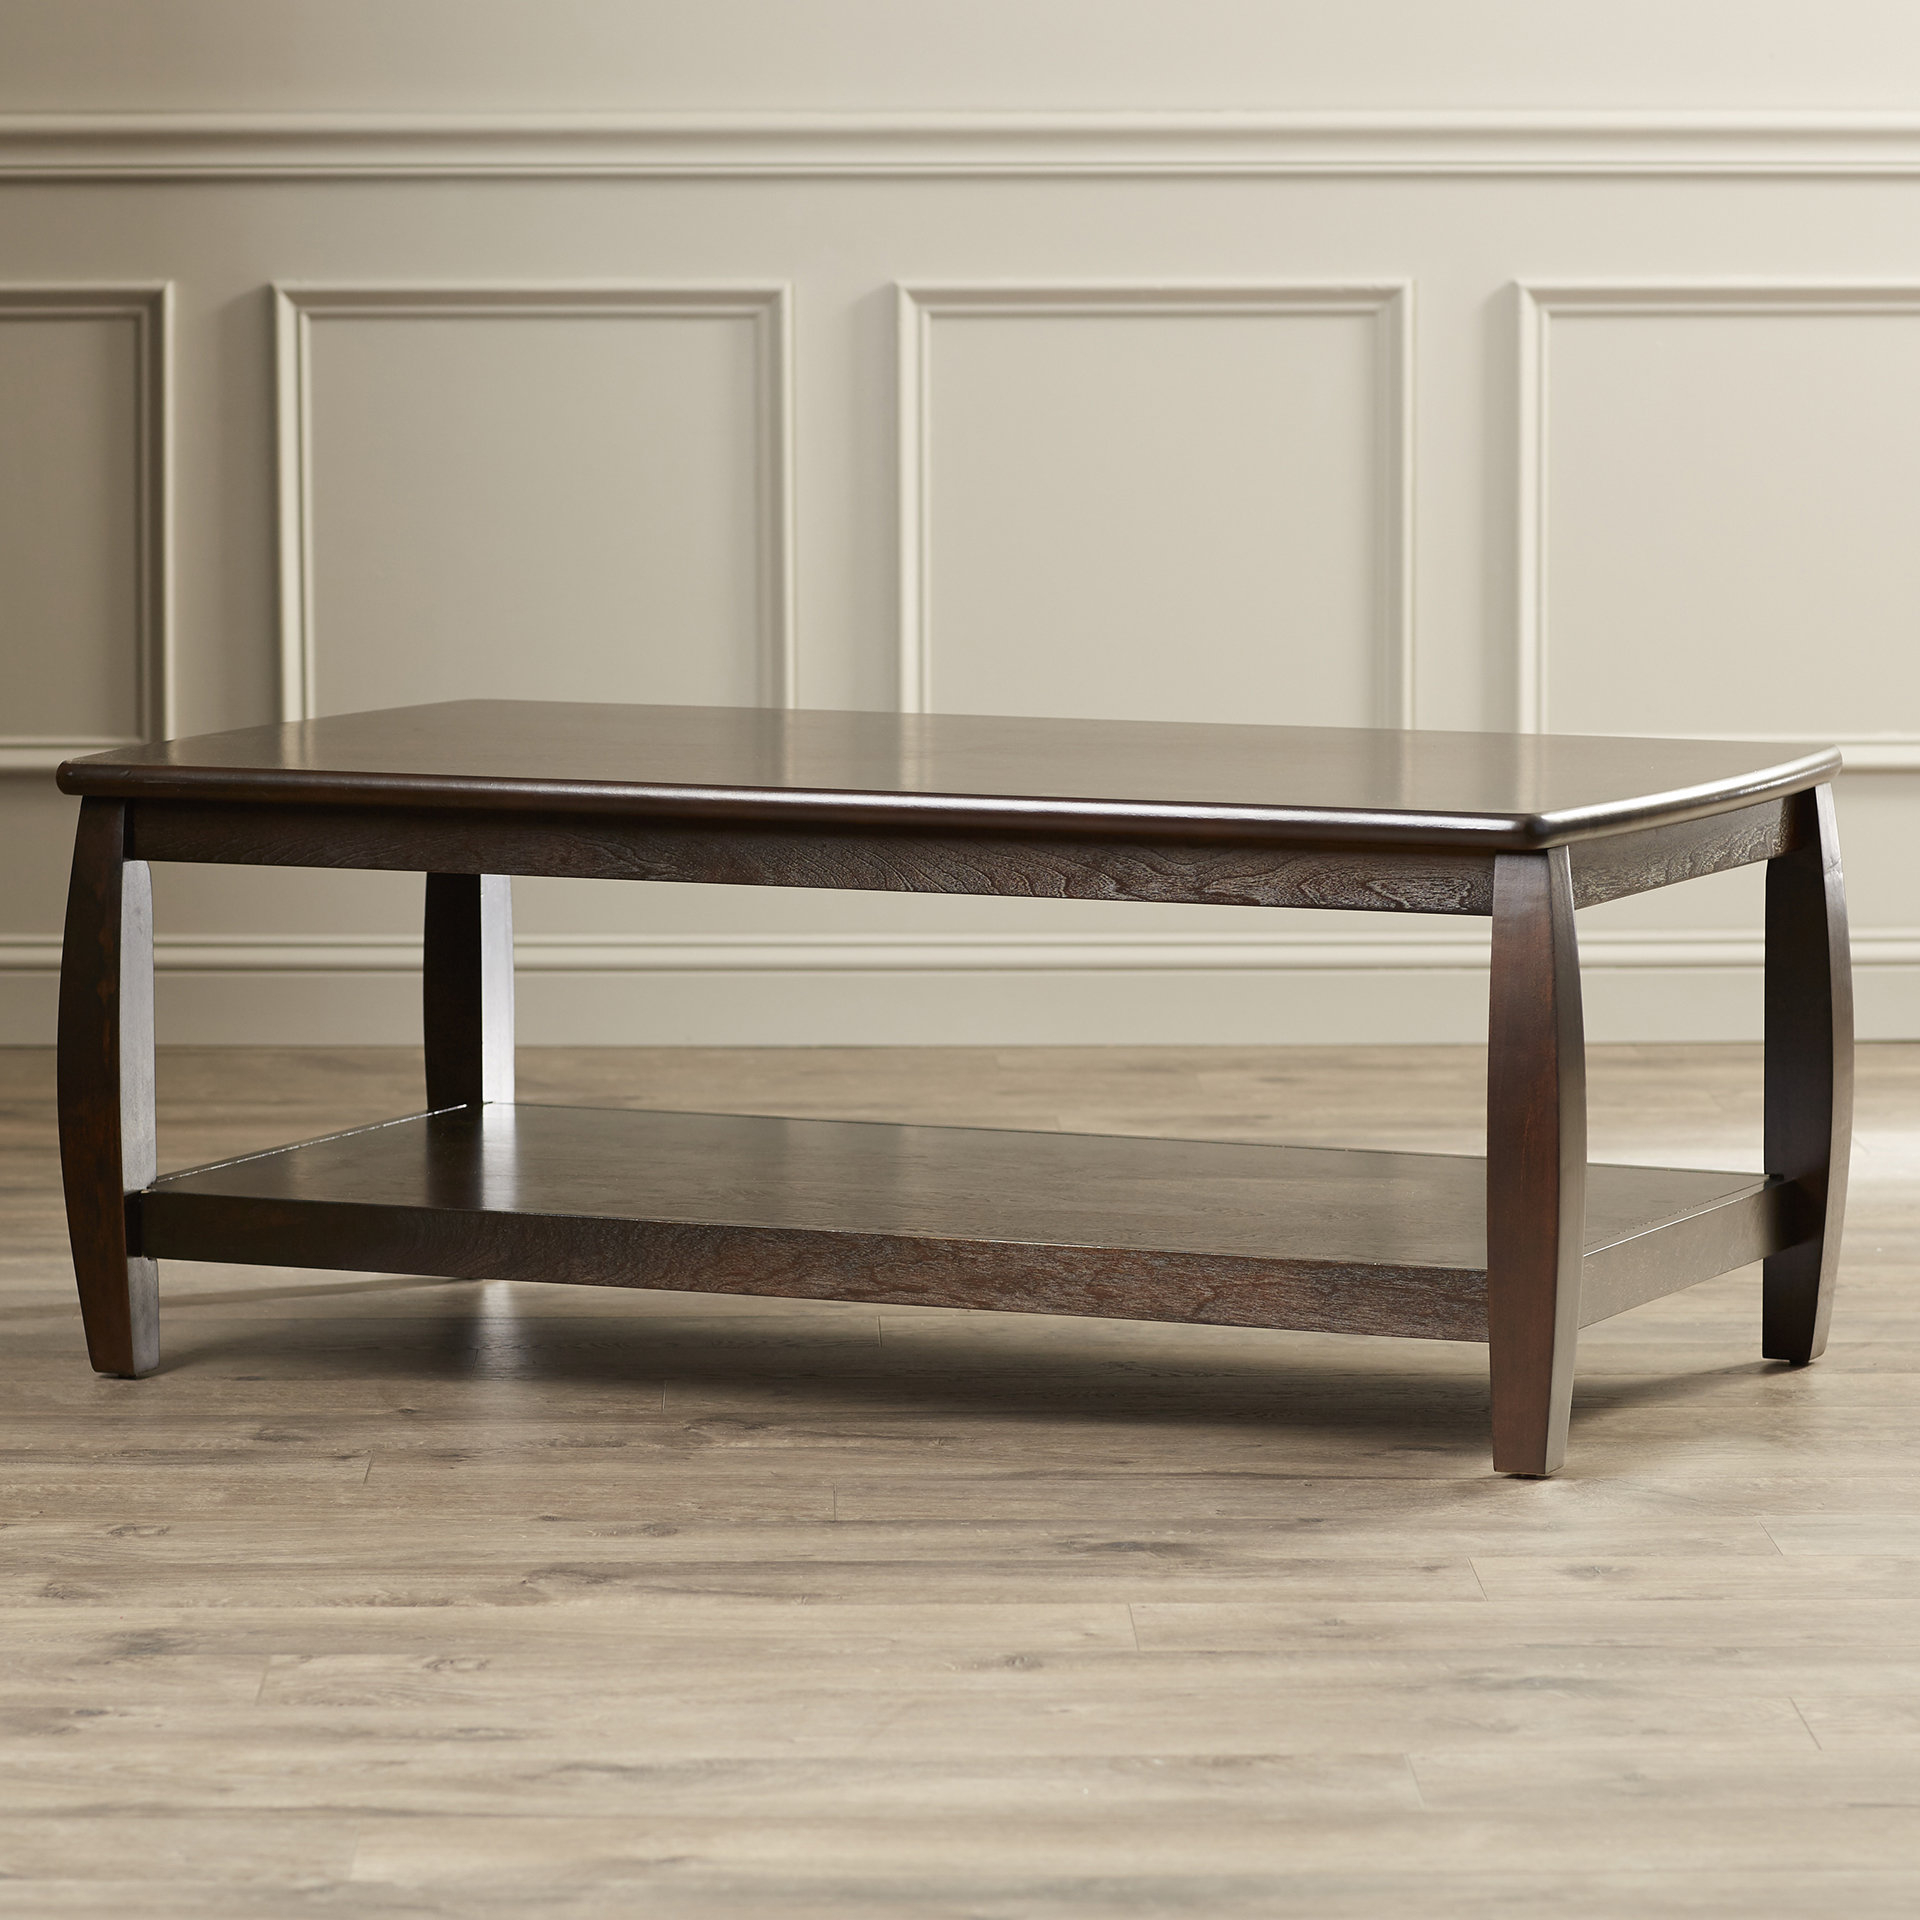 Charlton Home Leroy Coffee Table In Cappucino Reviews Wayfair intended for dimensions 1920 X 1920